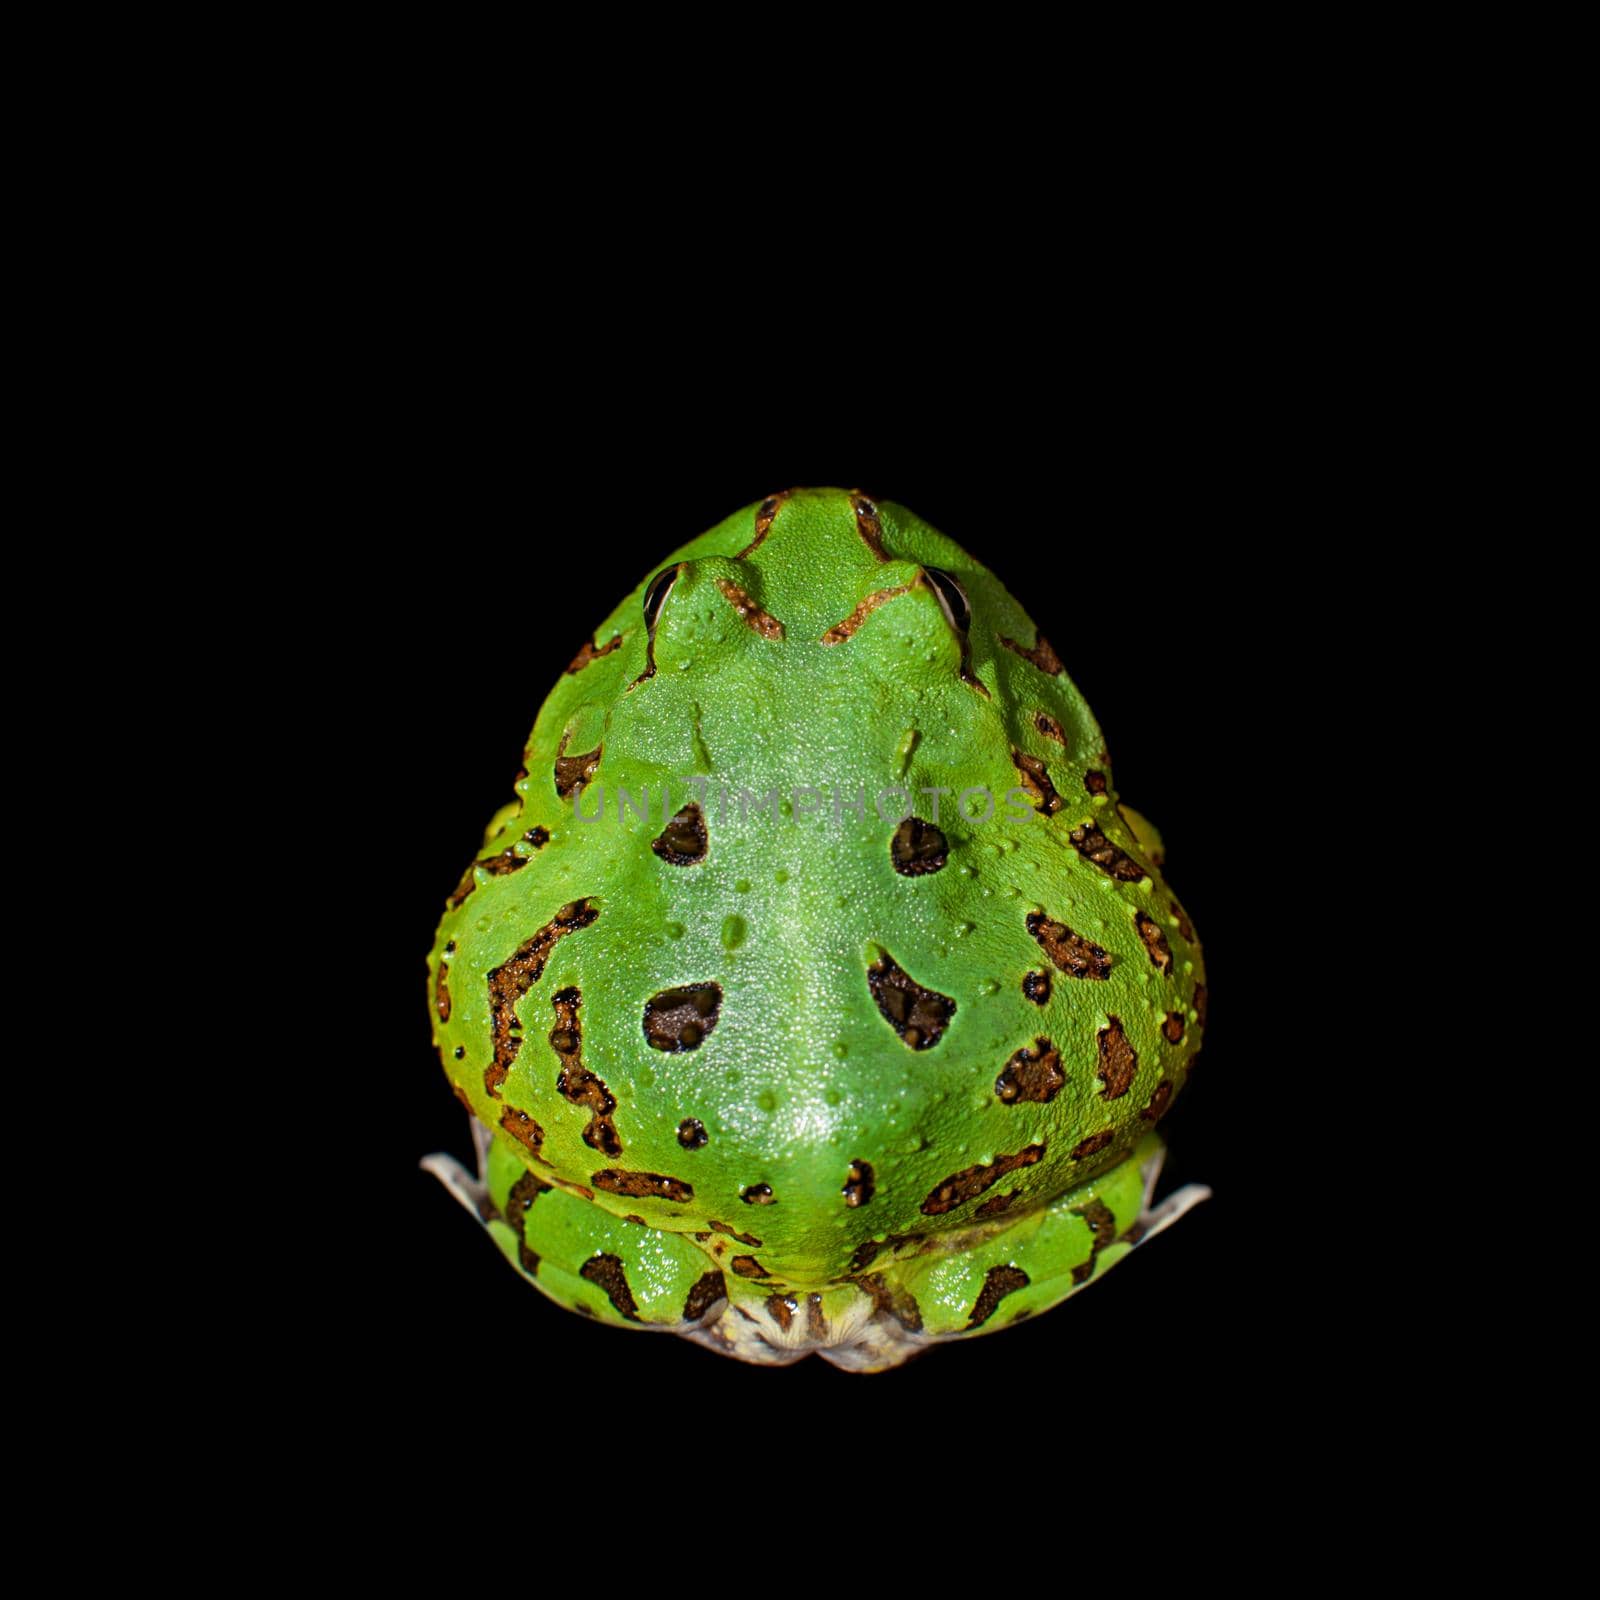 The Brazilian horned frog, Ceratophrys aurita, isolated on black background